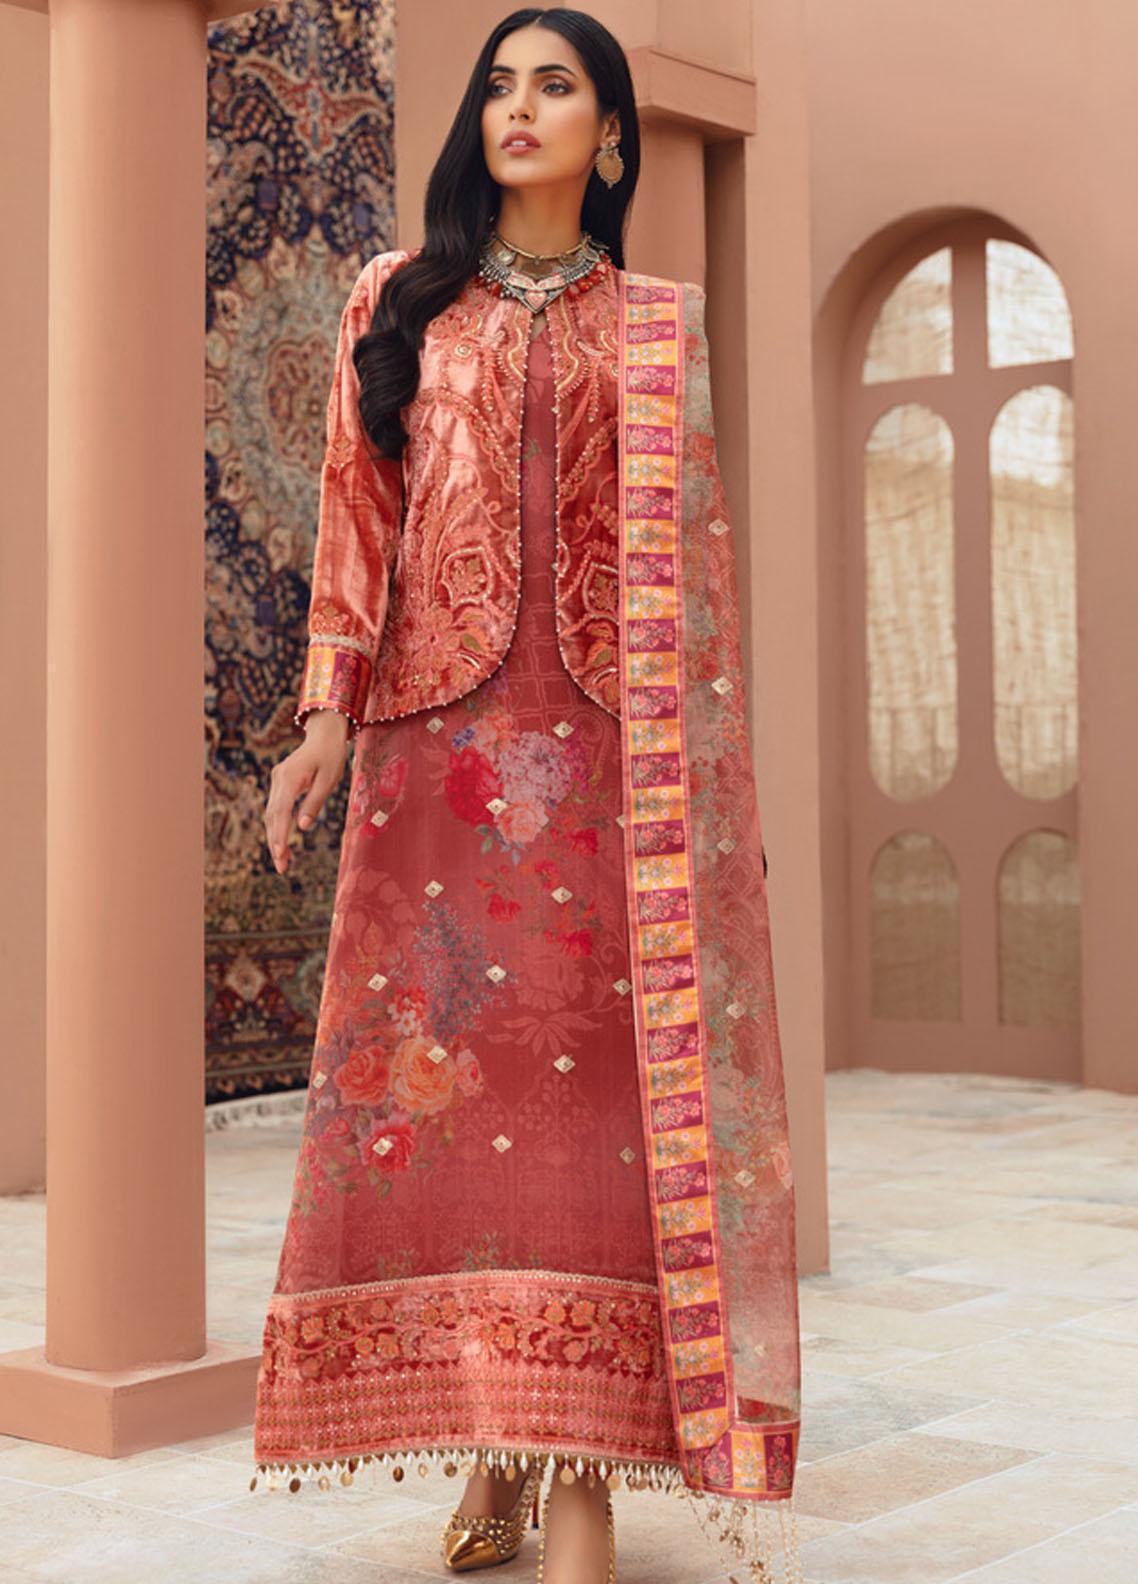 Noor by Saadia Asad Embroidered Velvet Suit Unstitched 3 Piece 04 - Winter Collection